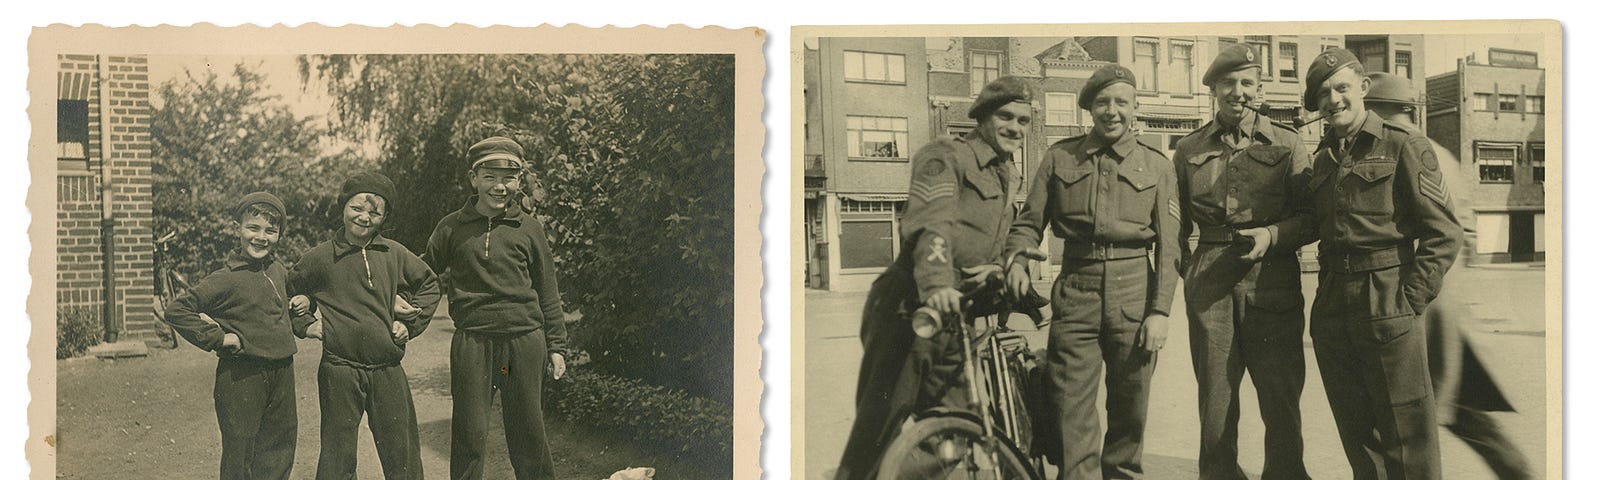 In the photo on the left, three smiling young boys pose outdoors. They are wearing matching 1/4-zip sweaters and baggy pants. In the photo on the right, four men wearing military uniforms and berets pose with a motorcycle in front of a row of narrow buildings.